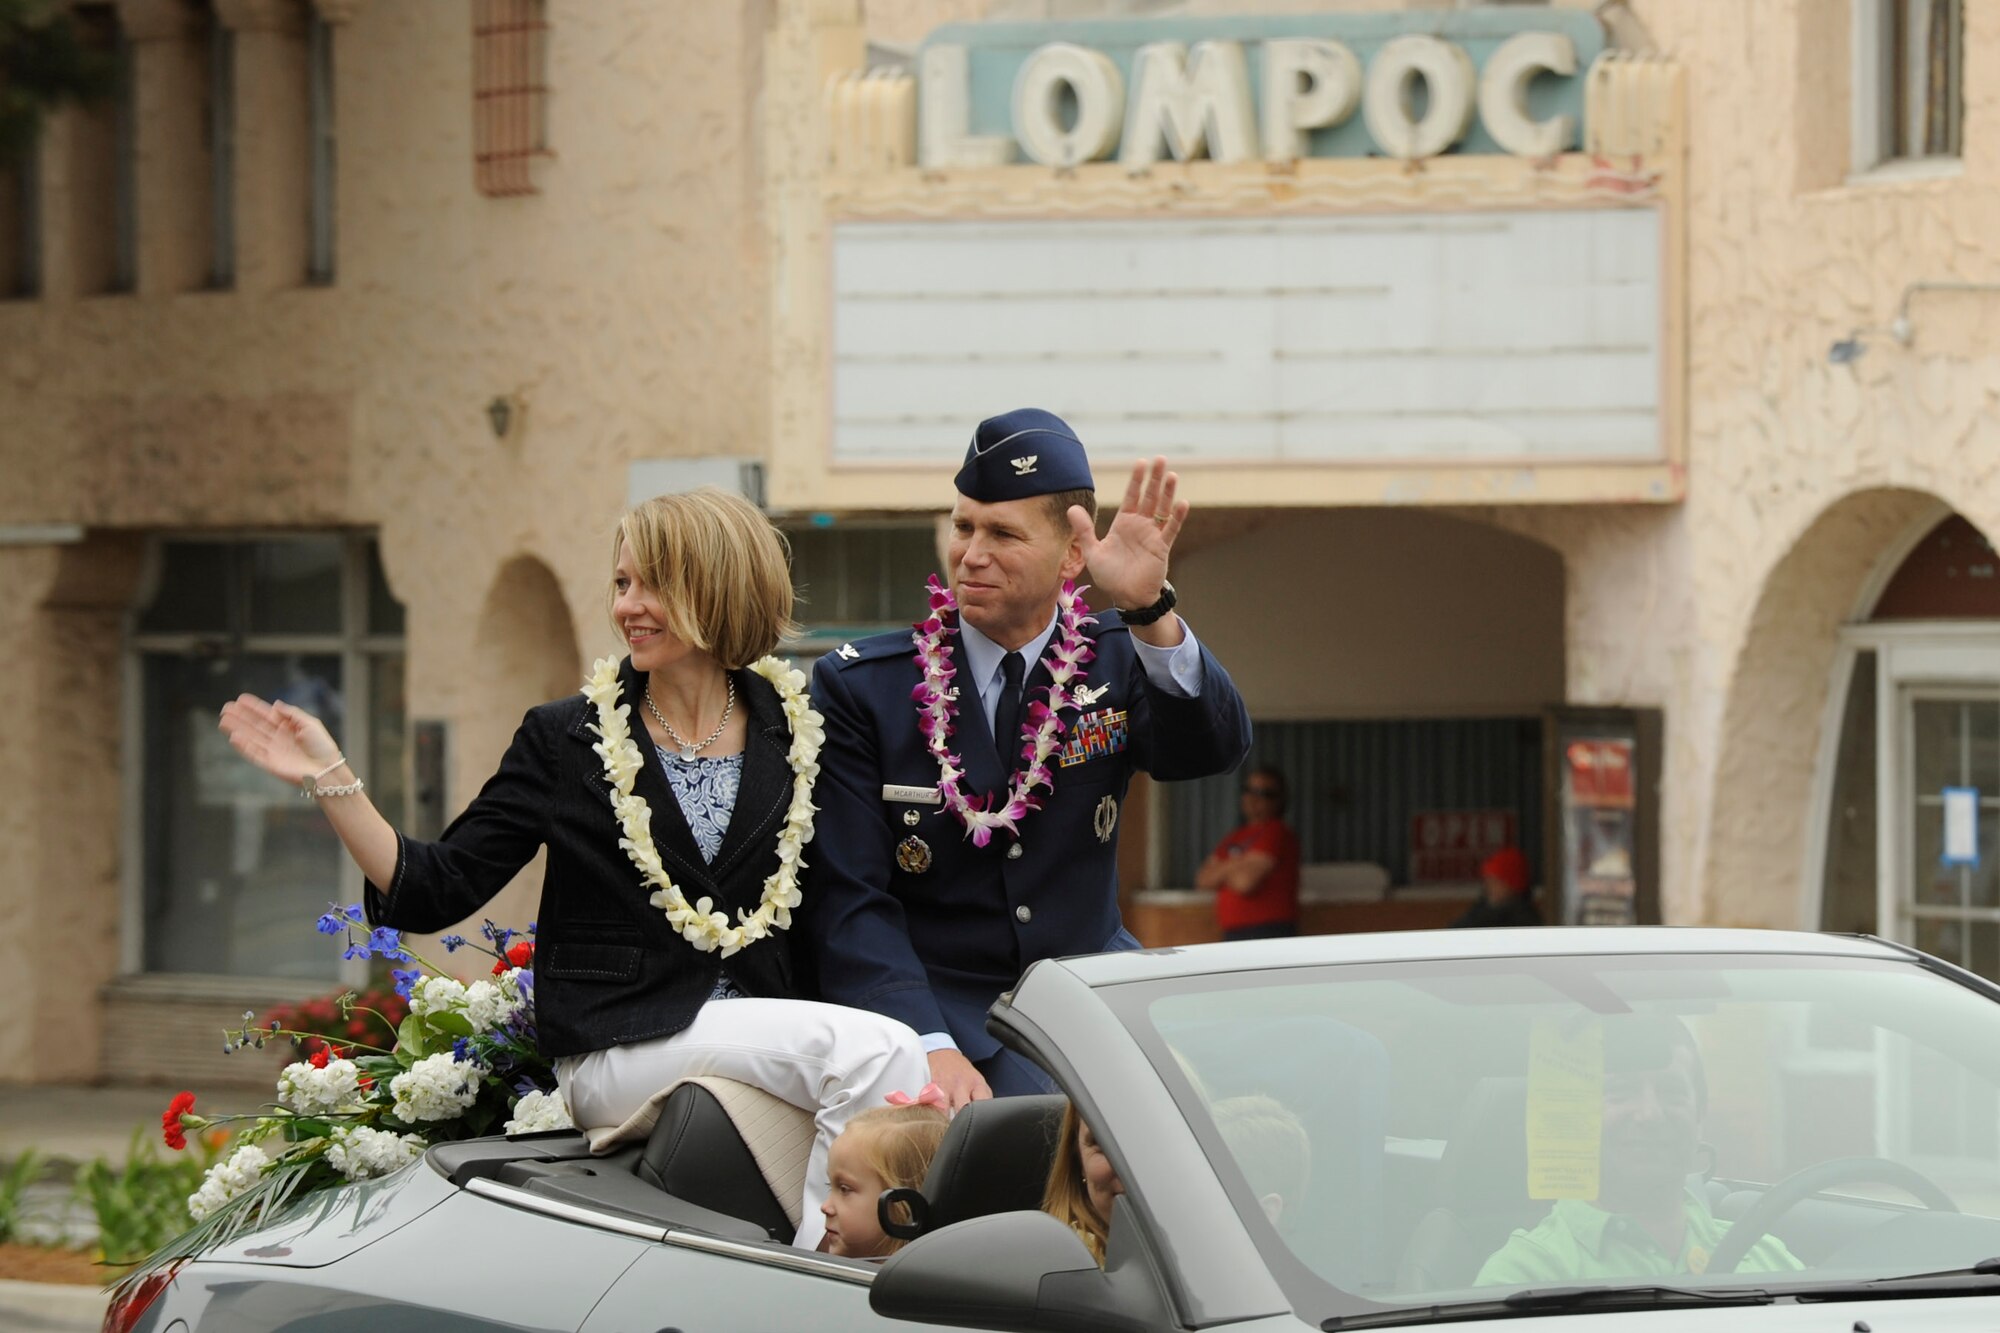 VANDENBERG AIR FORCE BASE, Calif. -- Col. Brent McArther, 30th Space Wing vice commander, and his family wave to parade watchers during the city of Lompoc's 60th Annual Flower Festival Saturday, June 23, 2012. The parade is part of a five day celebration of Lompoc’s flower fields and culture. (U.S. Air Force photo/Staff Sgt. Levi Riendeau)